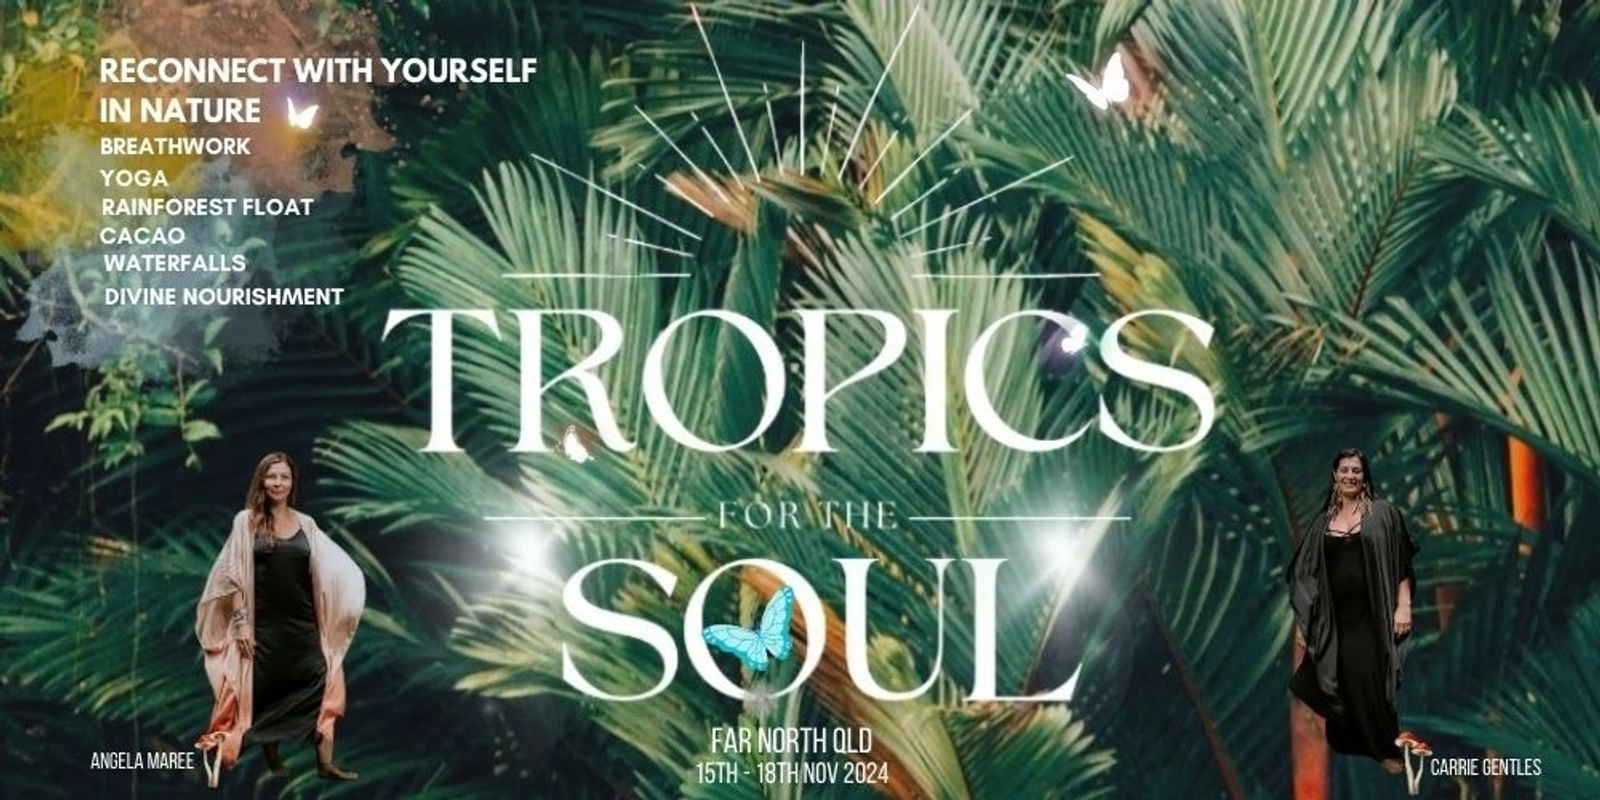 Banner image for TROPICS FOR THE SOUL RETREAT